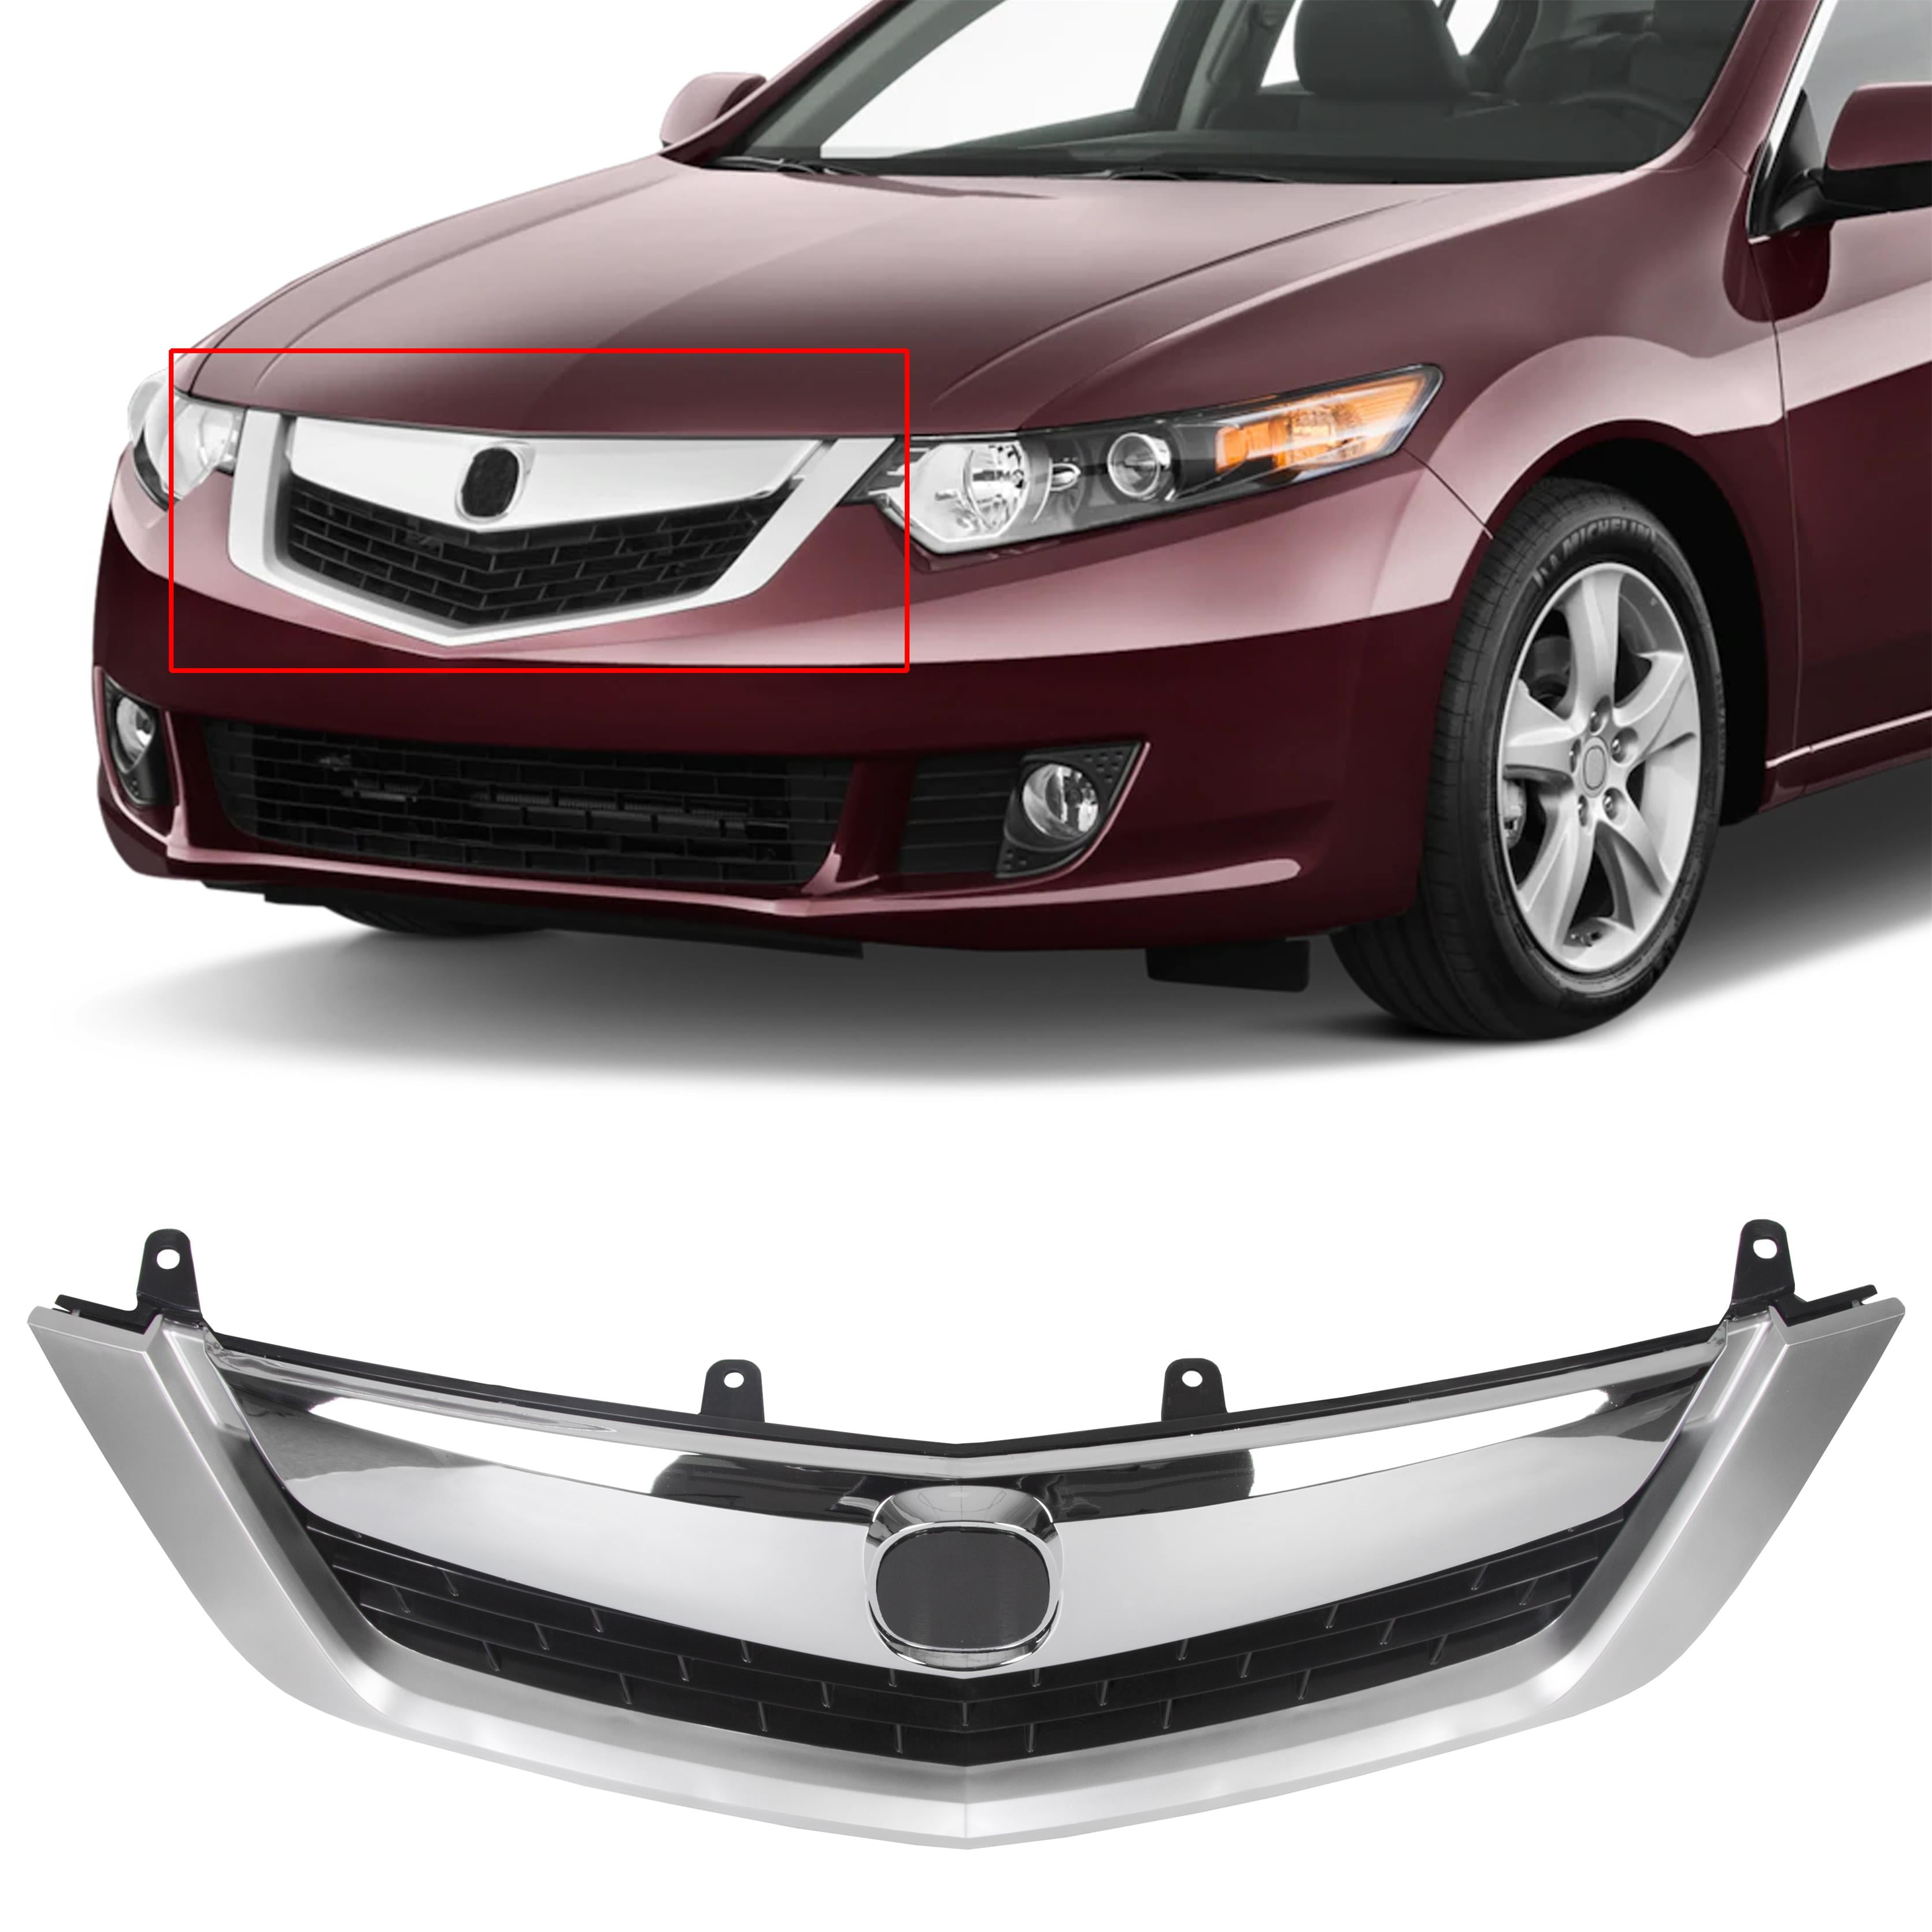 Partomotive For 05-10 Jetta Front Lower Grille Trim Grill Molding Chrome VW1210100 1K5853761A2ZZ 